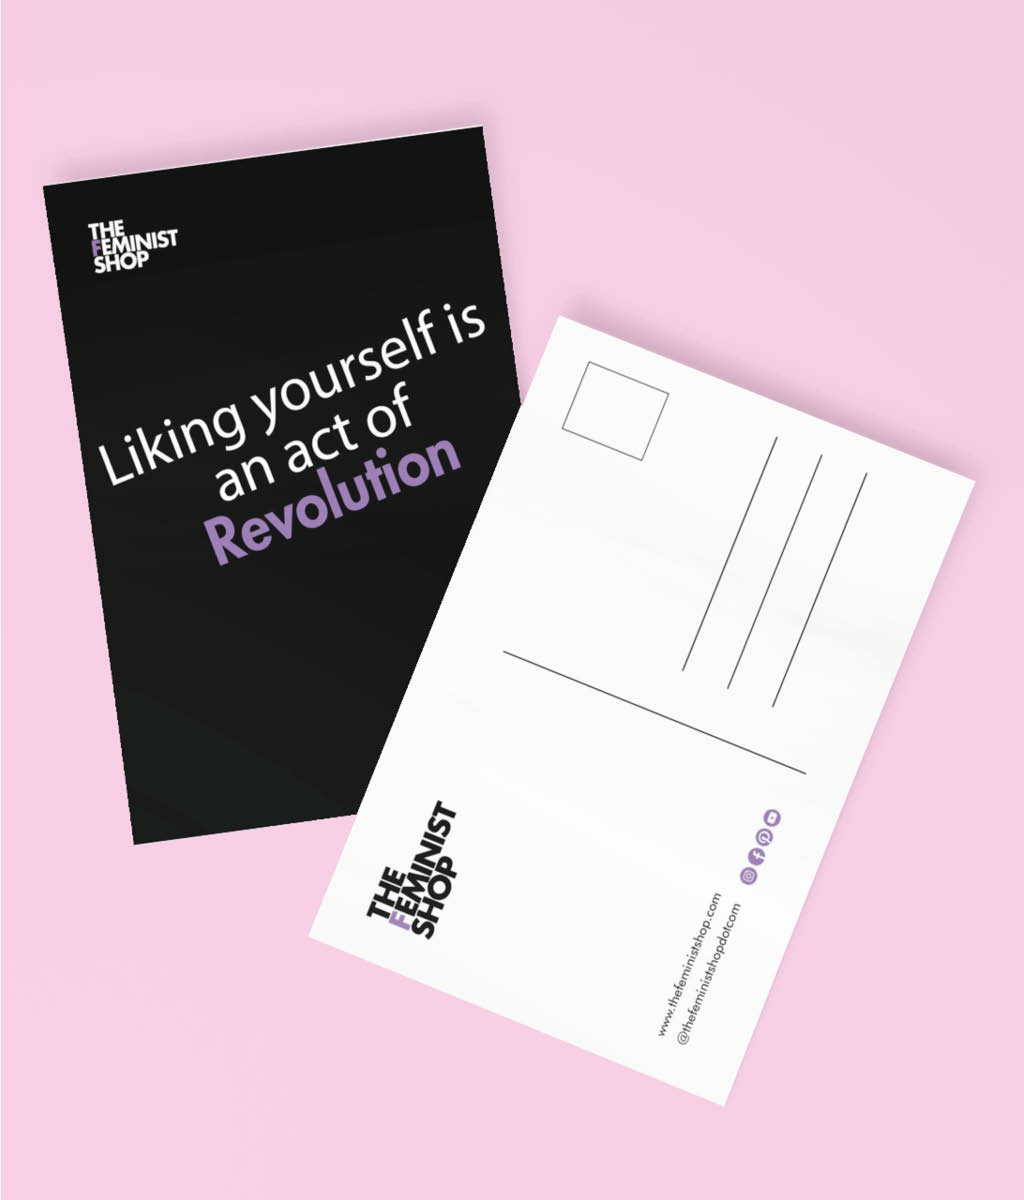 Feminist Postcard - Liking yourself is an act of Revolution